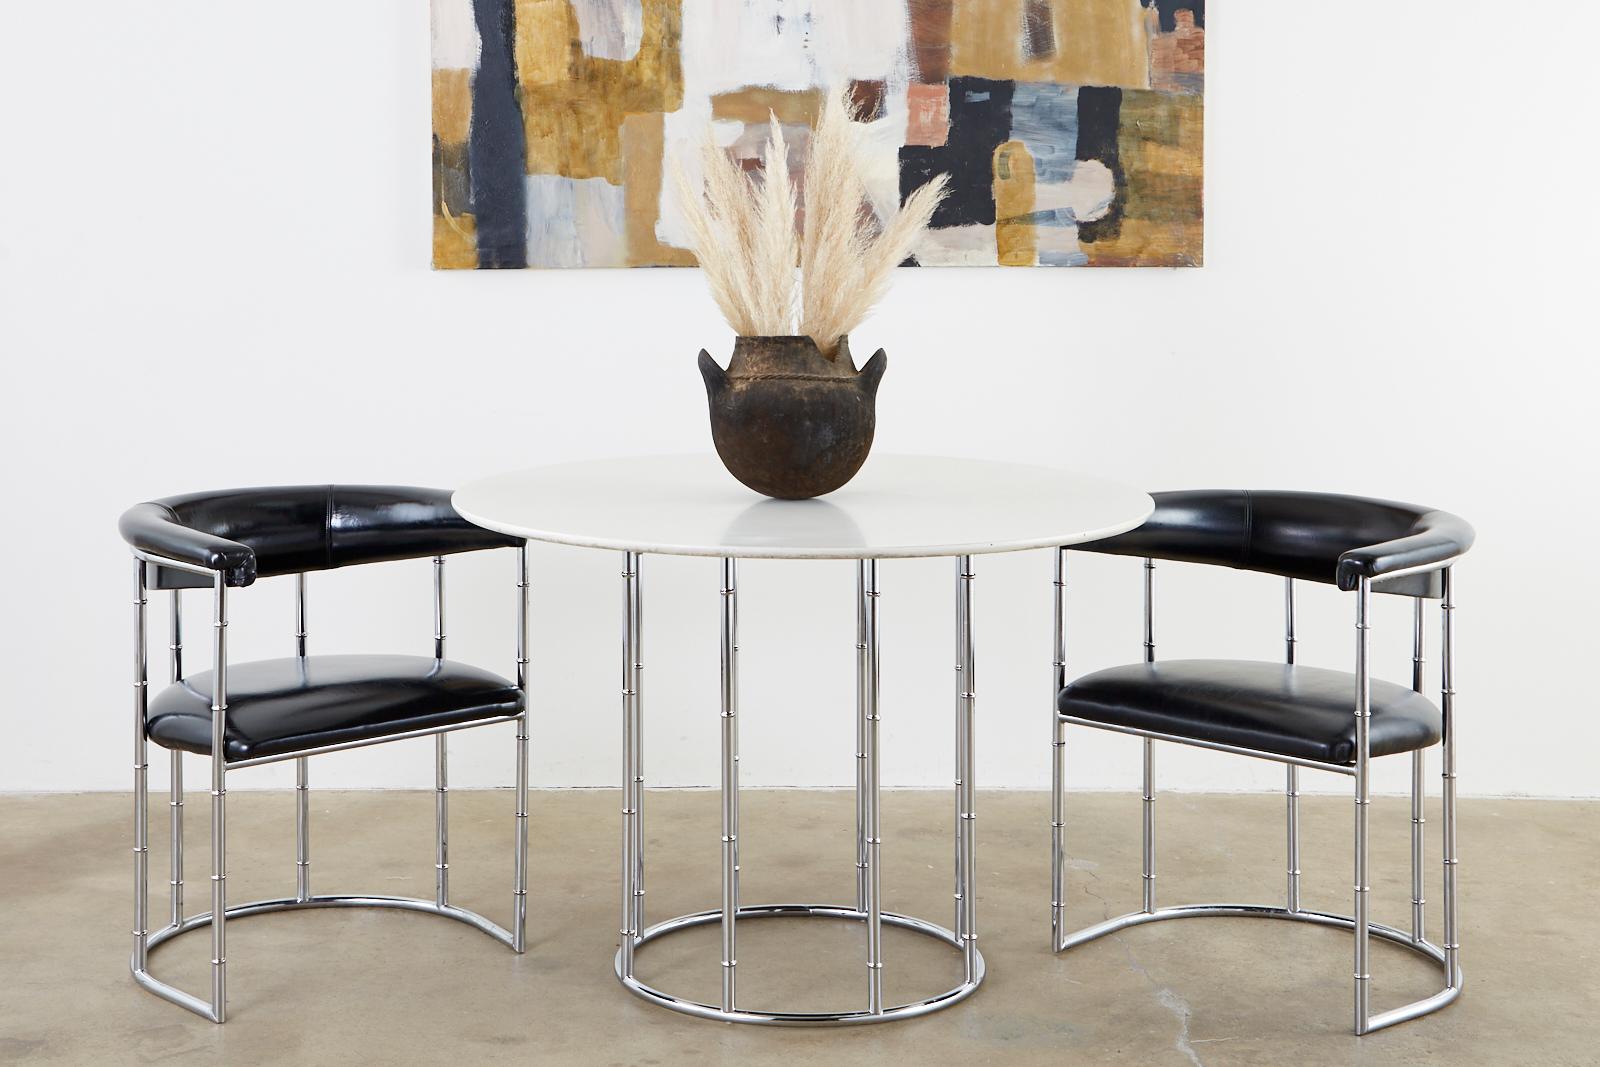 Mid-Century Modern dining table featuring a faux bamboo chrome cage base topped with a laminate Formica round top. The attractive base has eight legs conjoined on top and bottom with round ring stretchers. The round Formica top has a white finish.